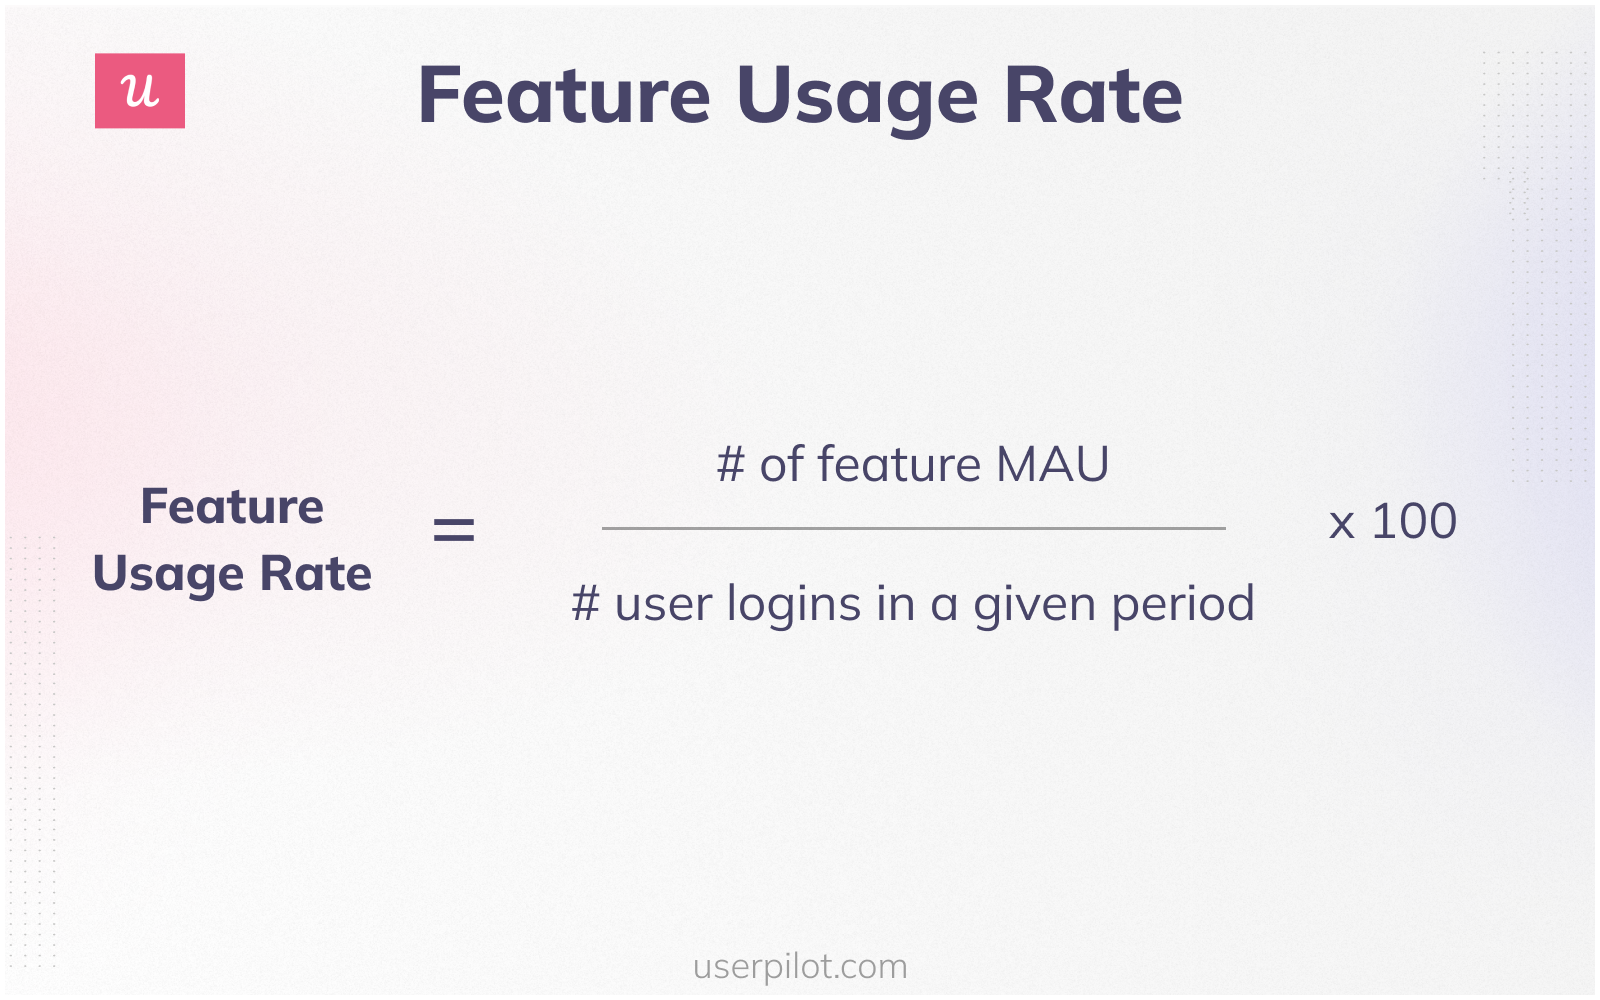 Feature usage rate calculation